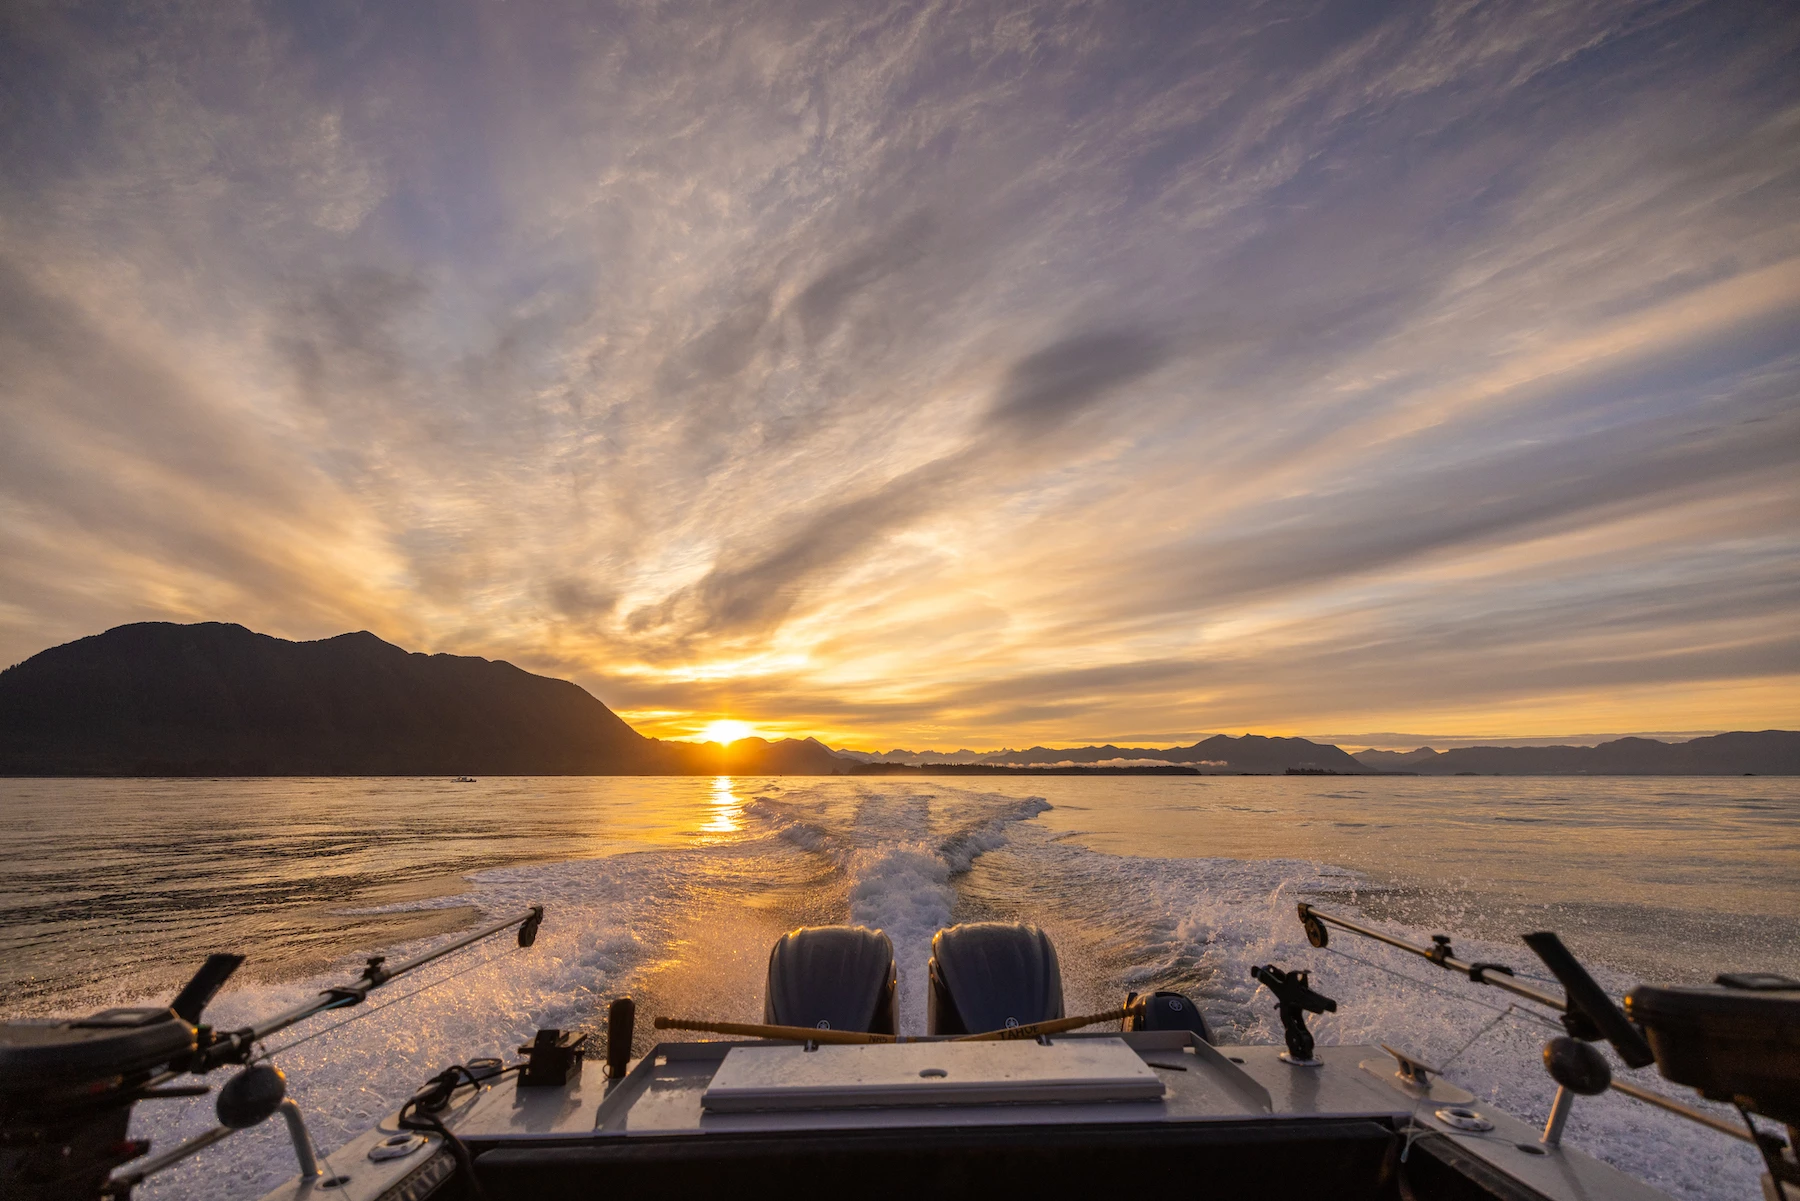 A beautiful sunset viewed from a speeding boat's stern, showing wake trails, fishing rods, mountains in the distance, and a dramatic sky.